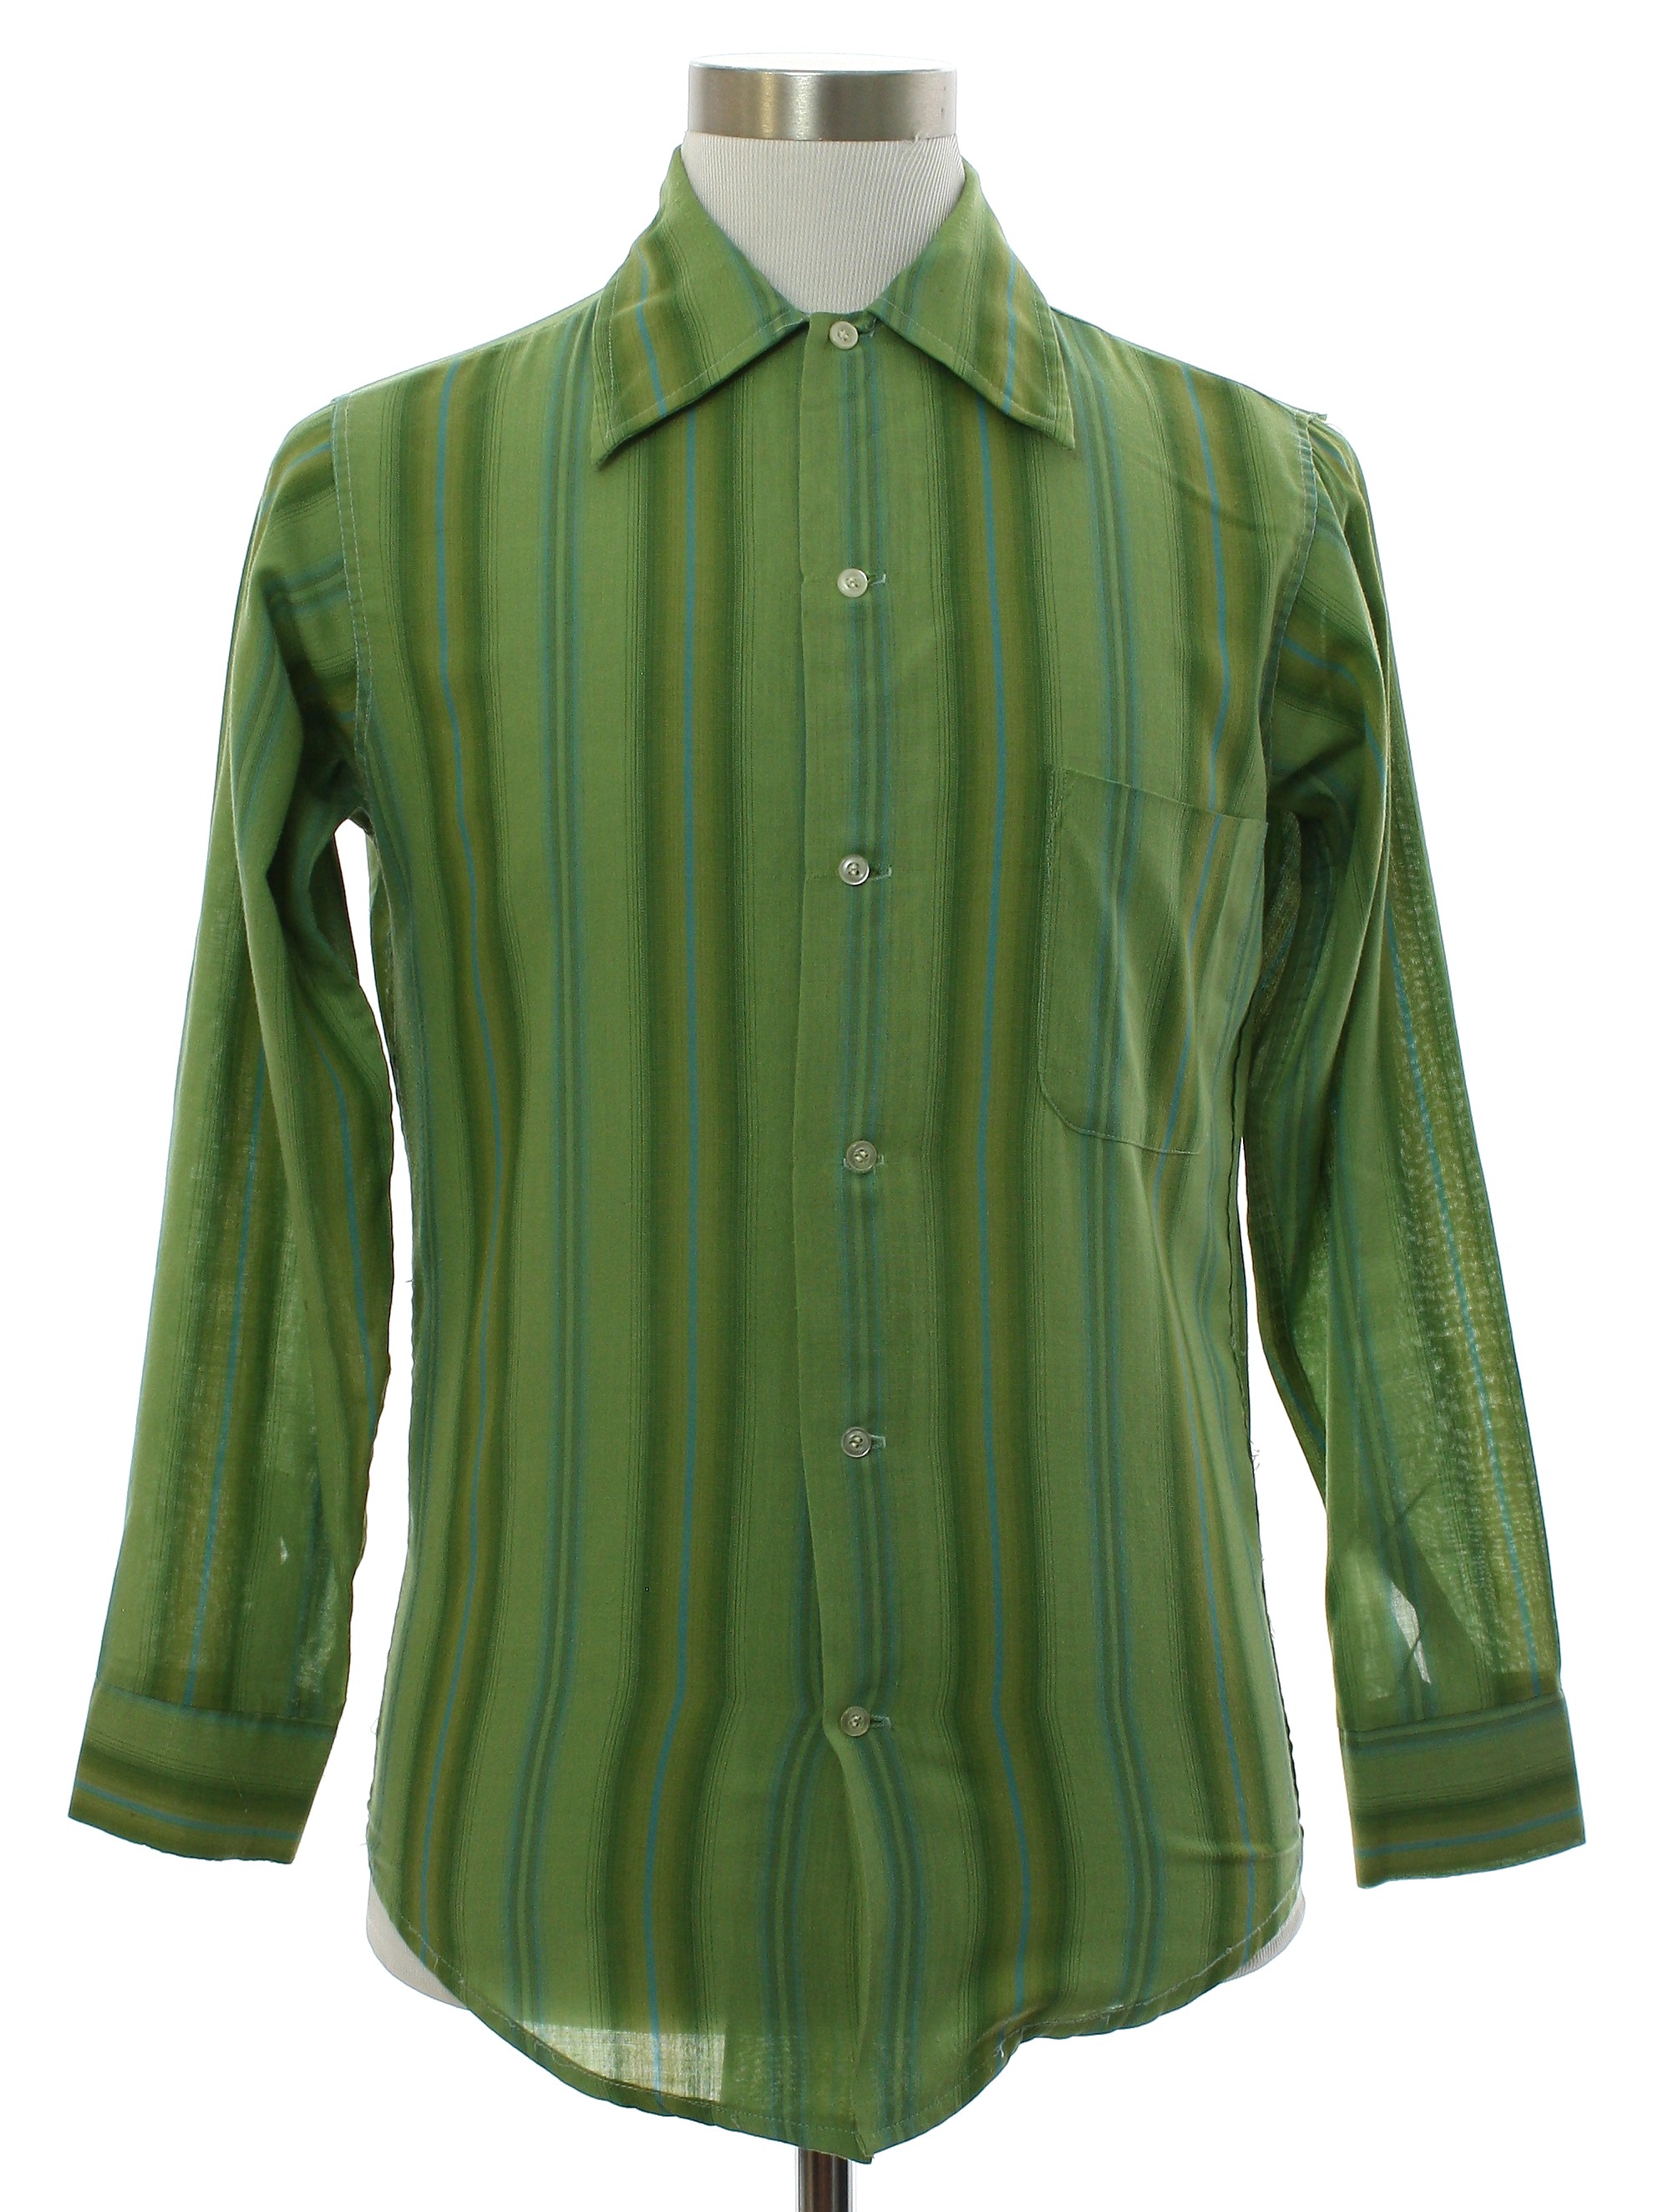 Retro Sixties Shirt: Late 60s -Care Label- Mens green background ...